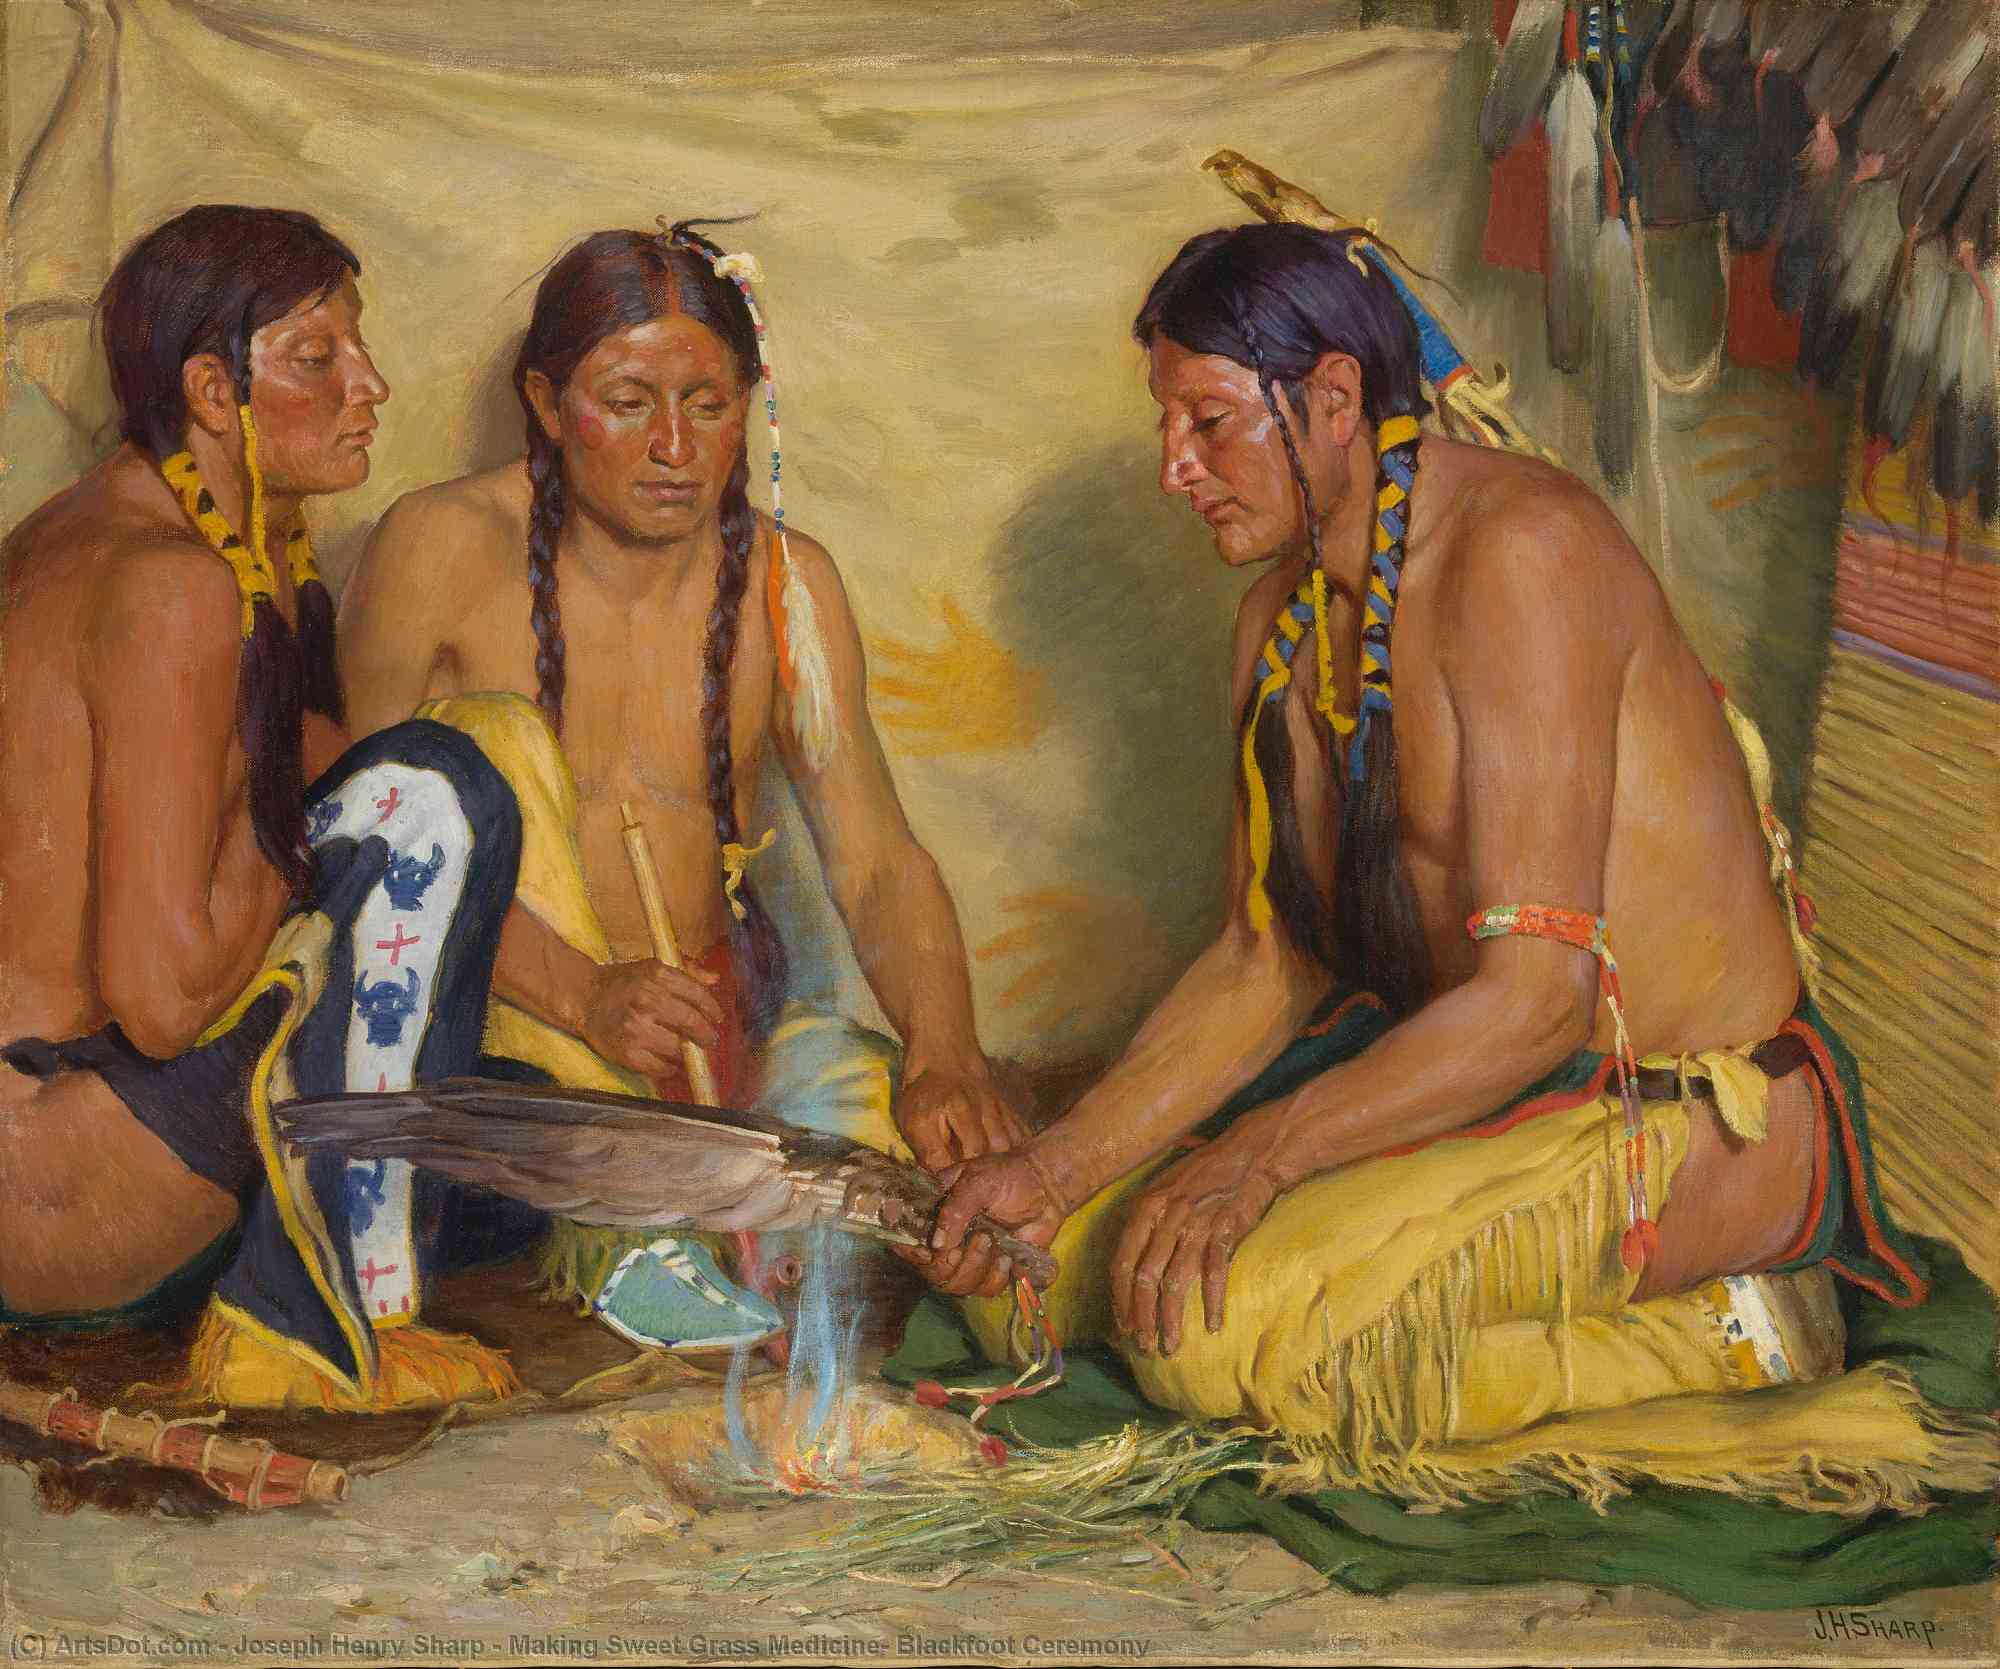 Order Paintings Reproductions Making Sweet Grass Medicine, Blackfoot Ceremony, 1920 by Joseph Henry Sharp (Inspired By) (1859-1953, United States) | ArtsDot.com